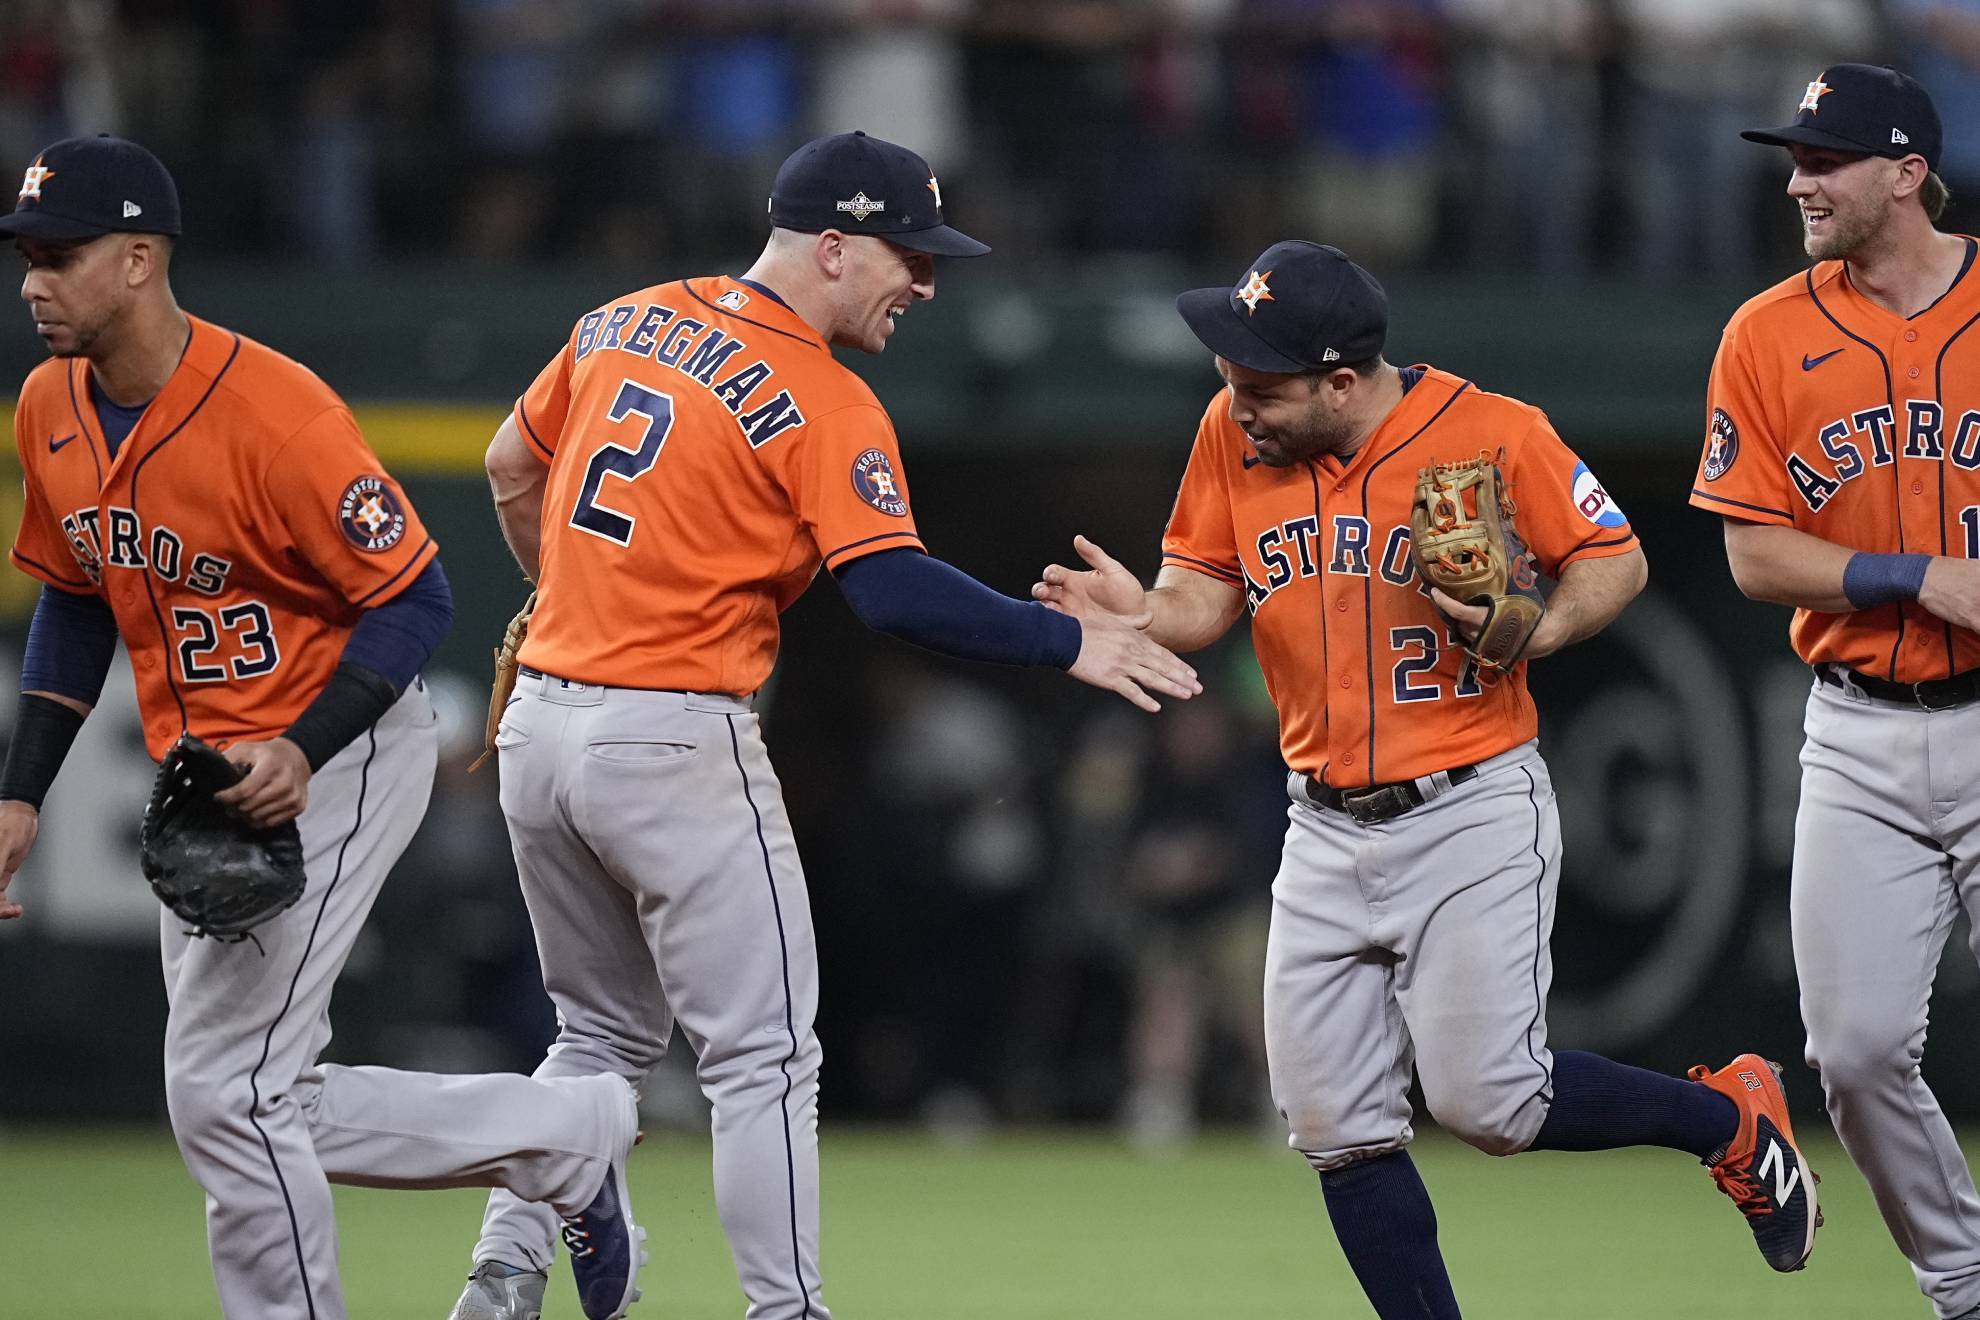 "This will go down in history" - Astros manager Baker, on dramatic Game 5 ALCS win